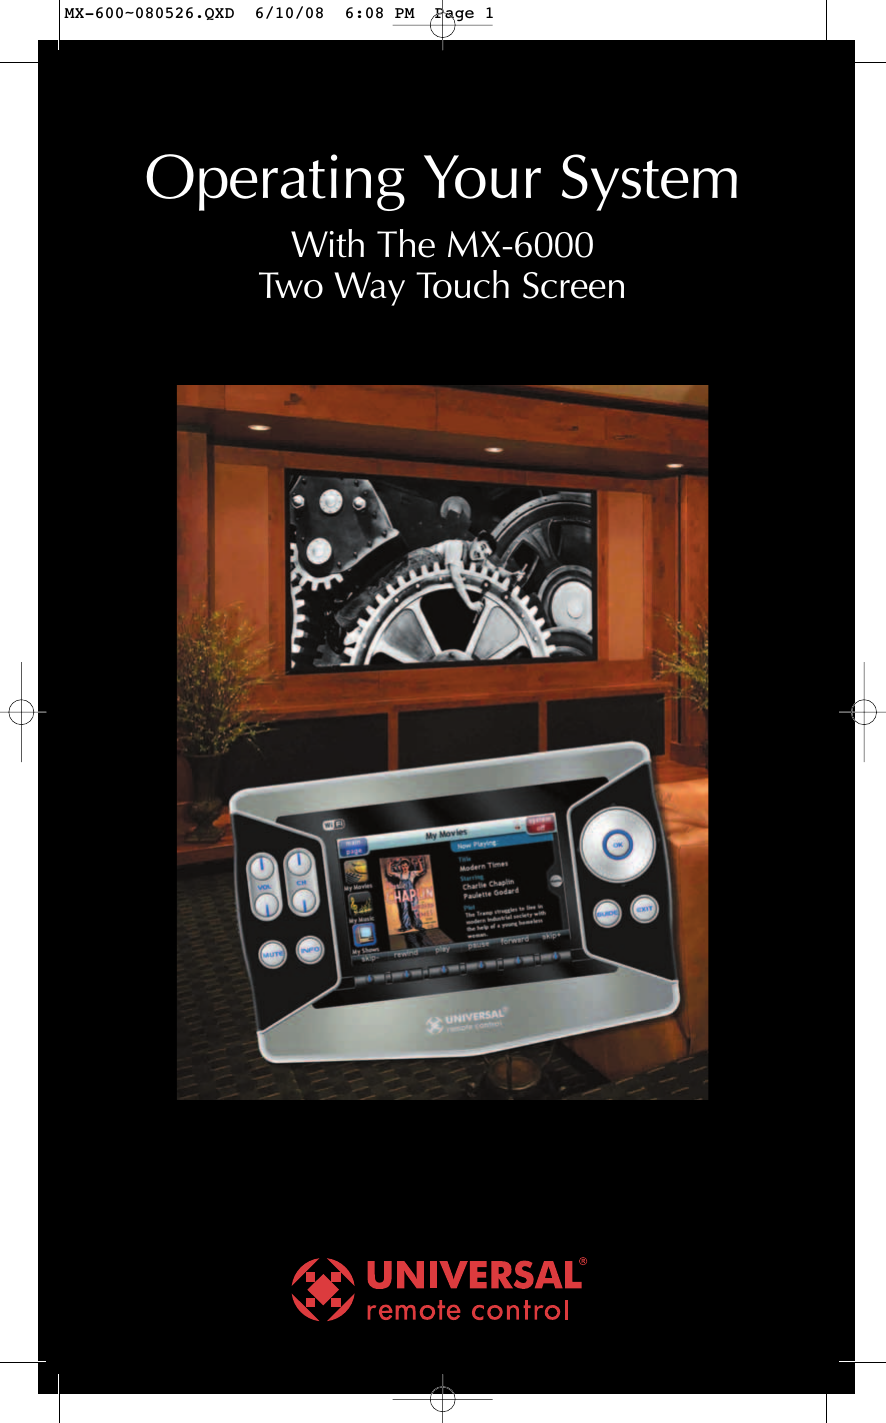 Operating Your SystemWith The MX-6000Two Way Touch ScreenMX-600~080526.QXD  6/10/08  6:08 PM  Page 1